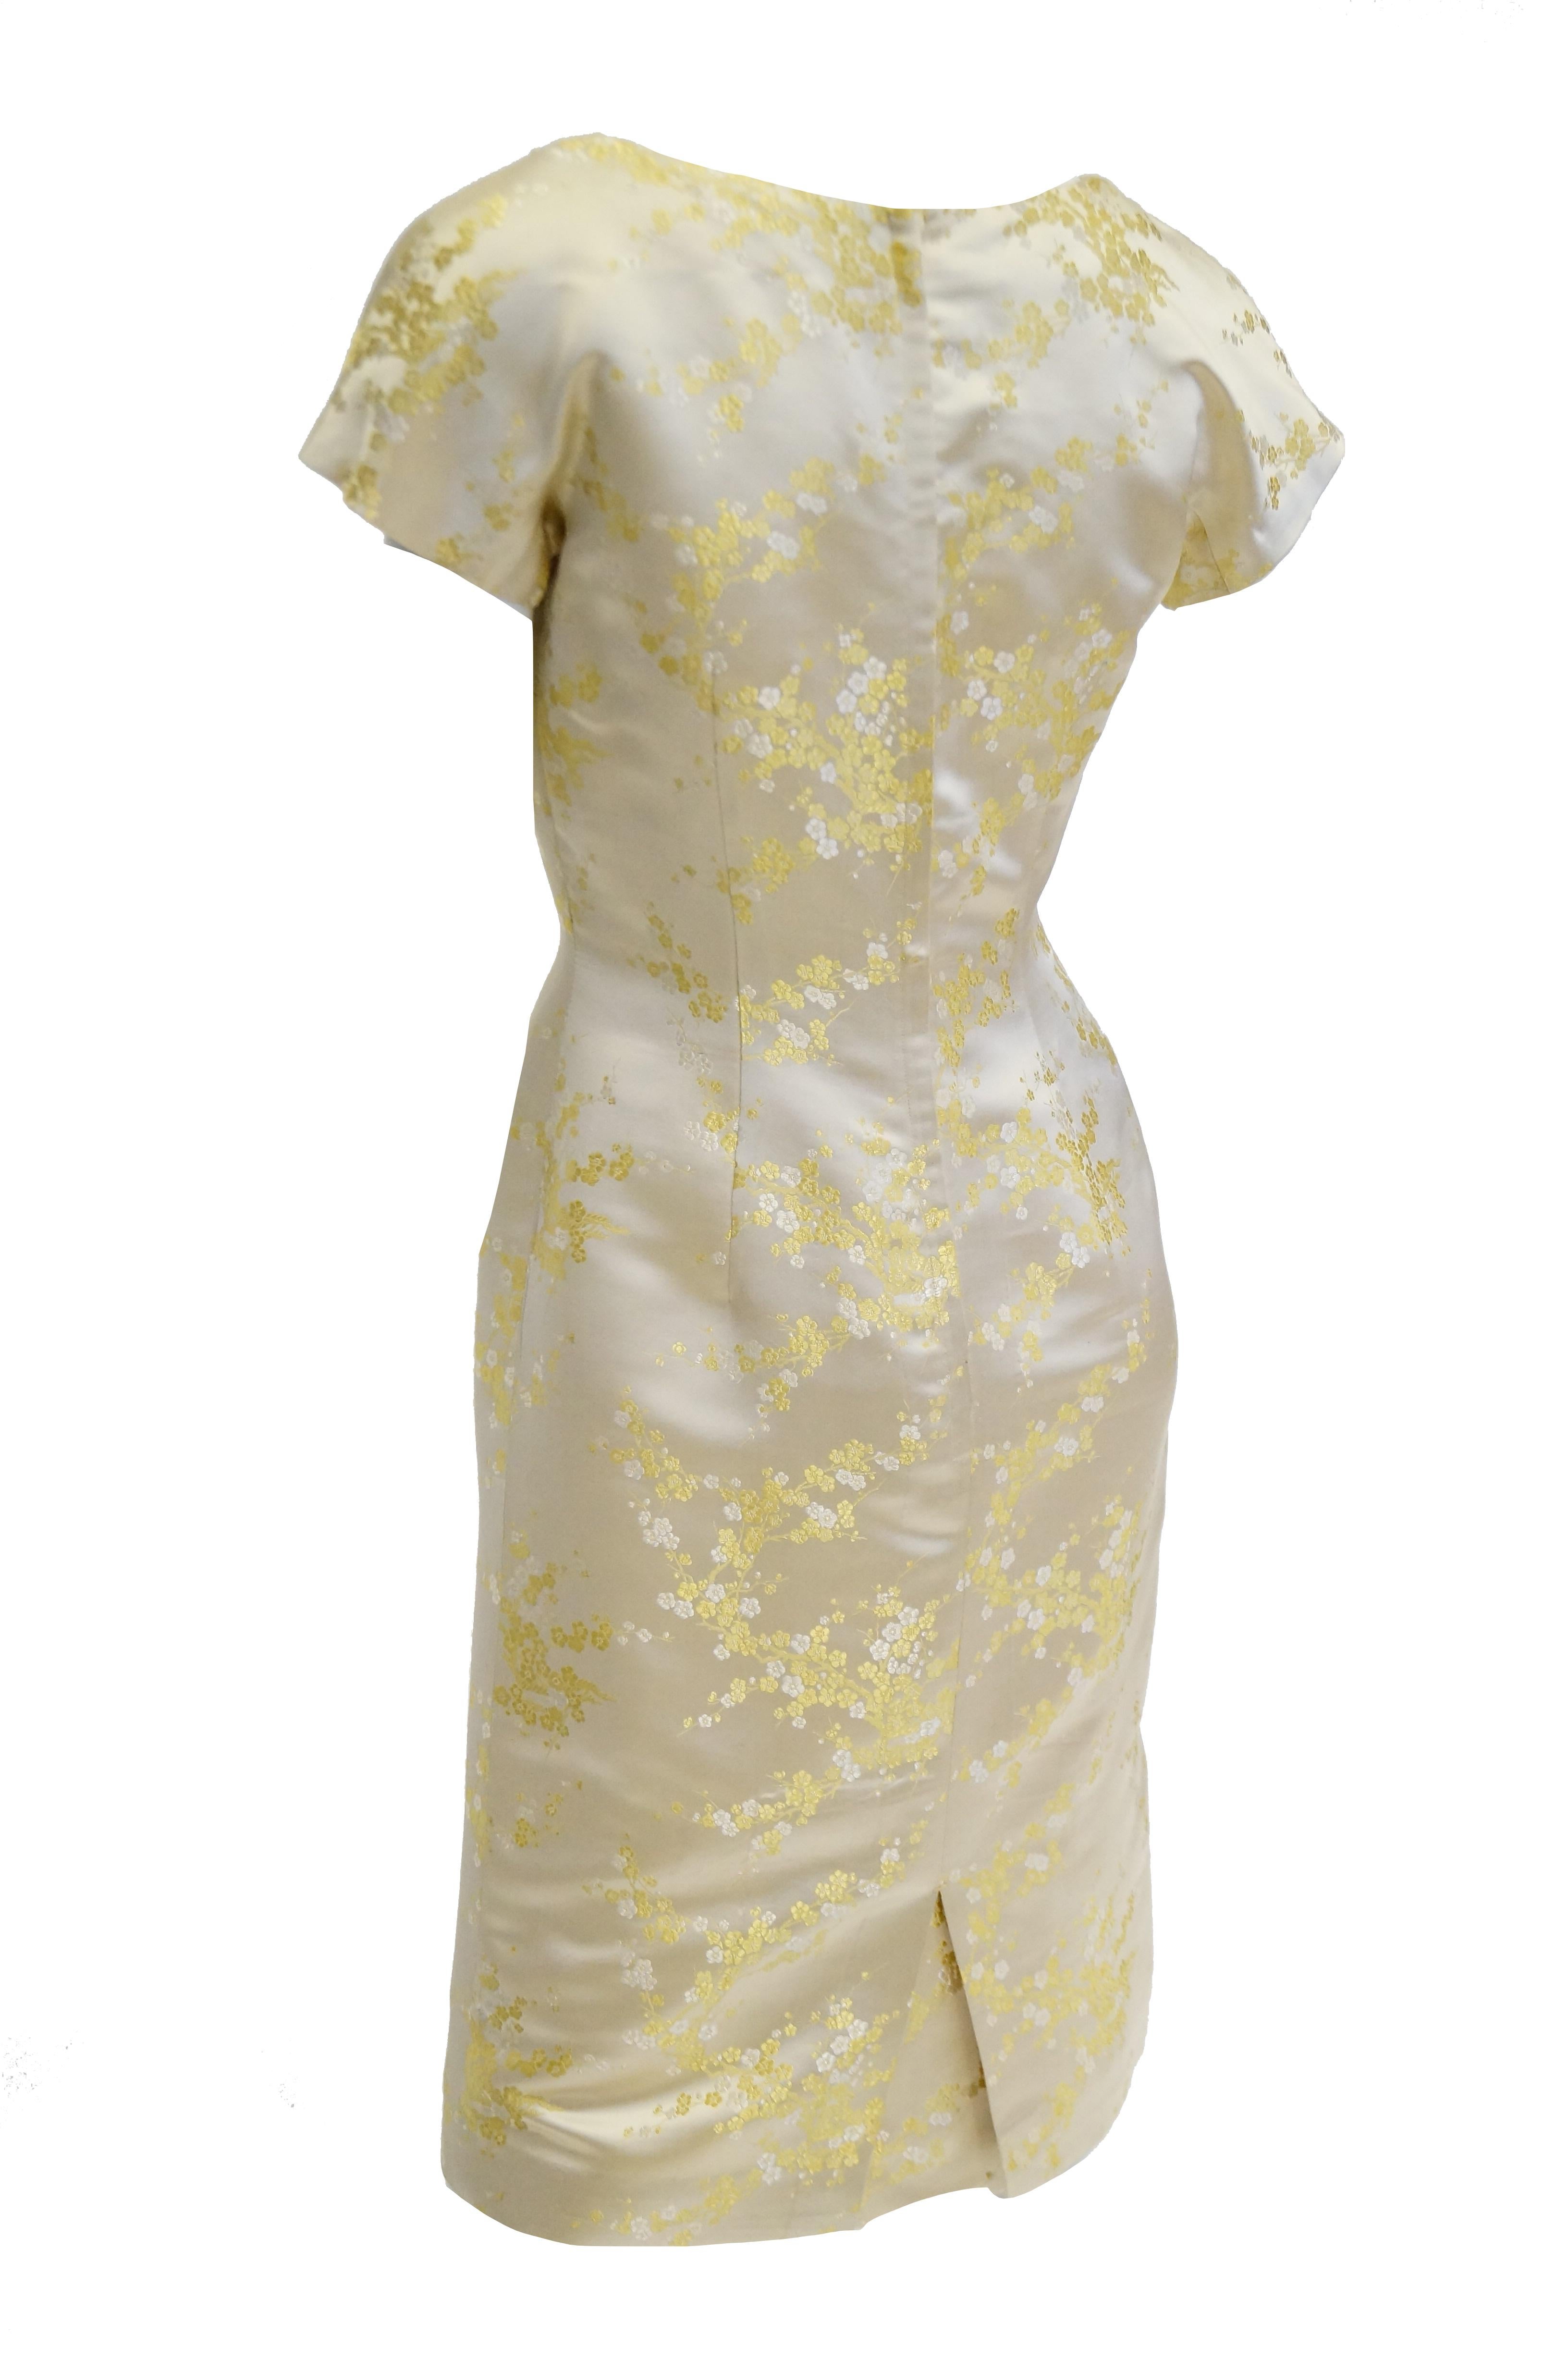 Women's or Men's  1960s Hong Kong Gold Cherry Blossom Floral Brocade Cocktail Dress and Coat For Sale